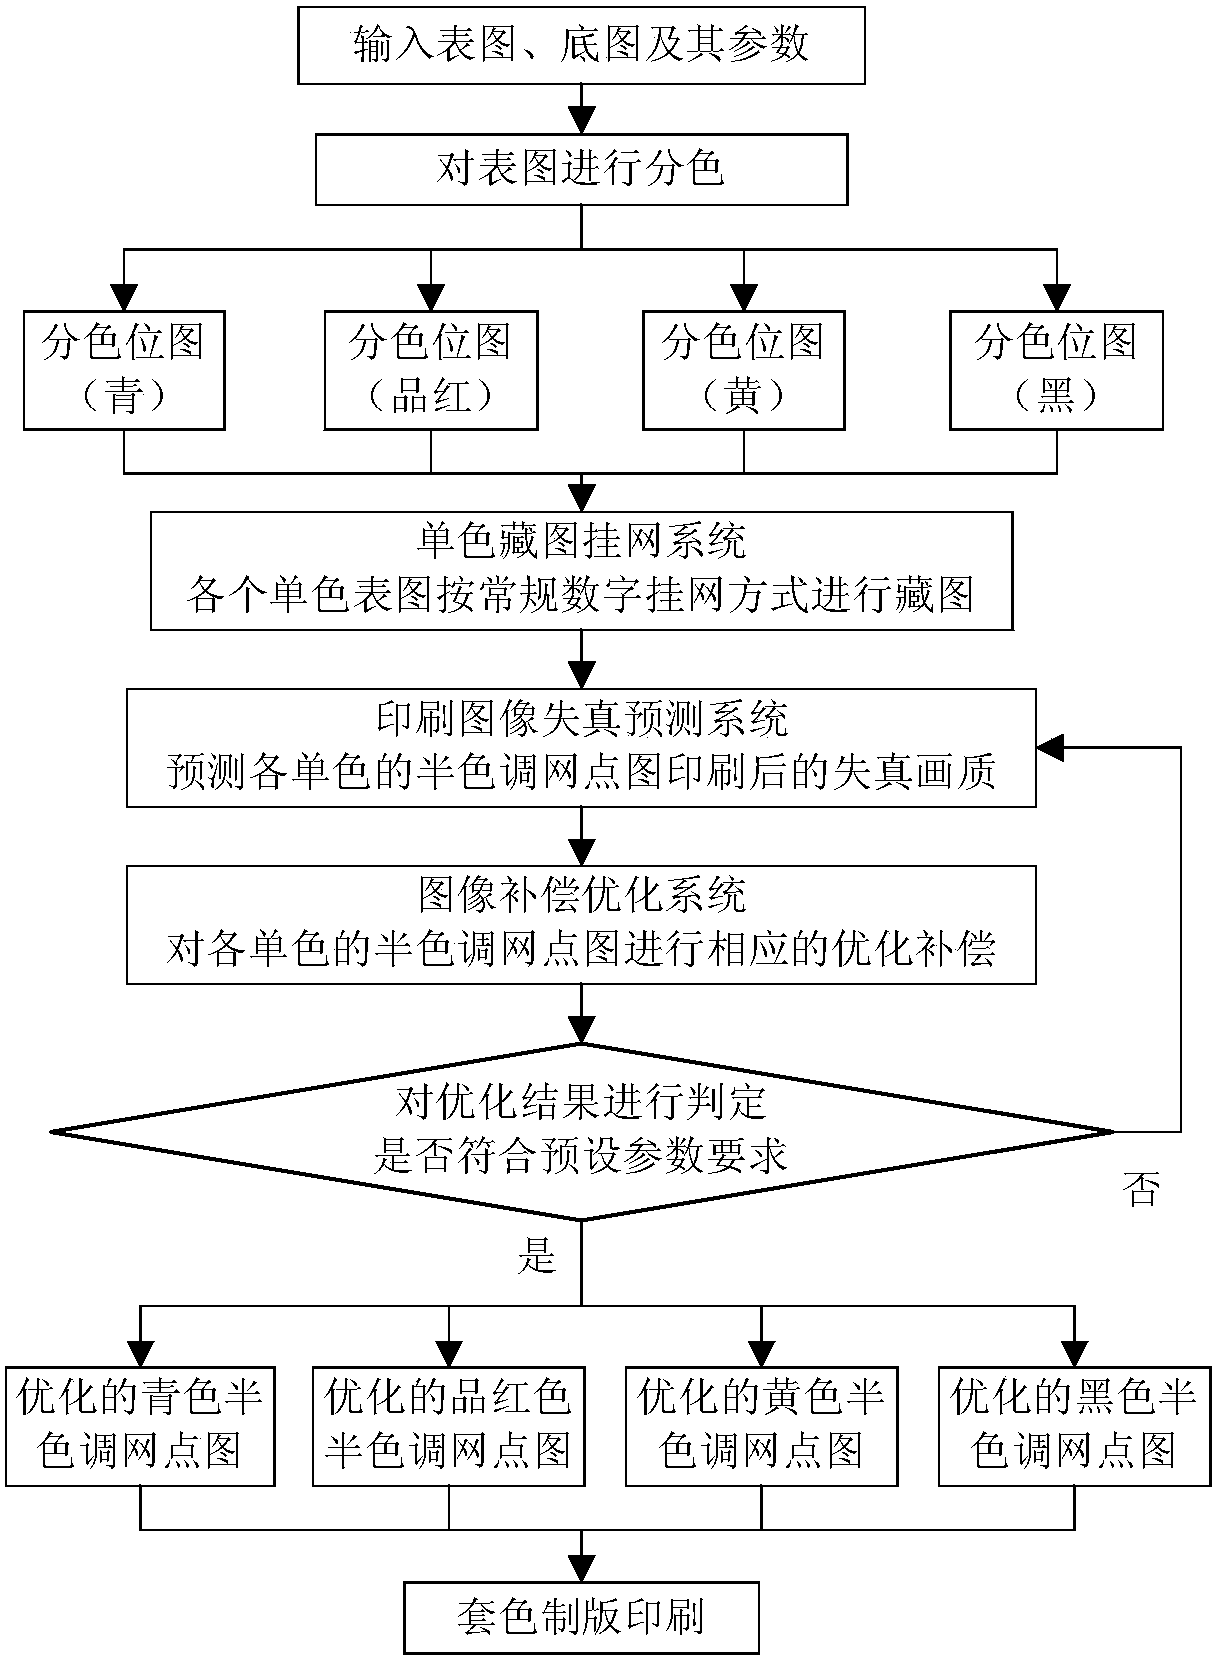 Method and system for digital hanging of high-fidelity Tibetan maps based on direct correction